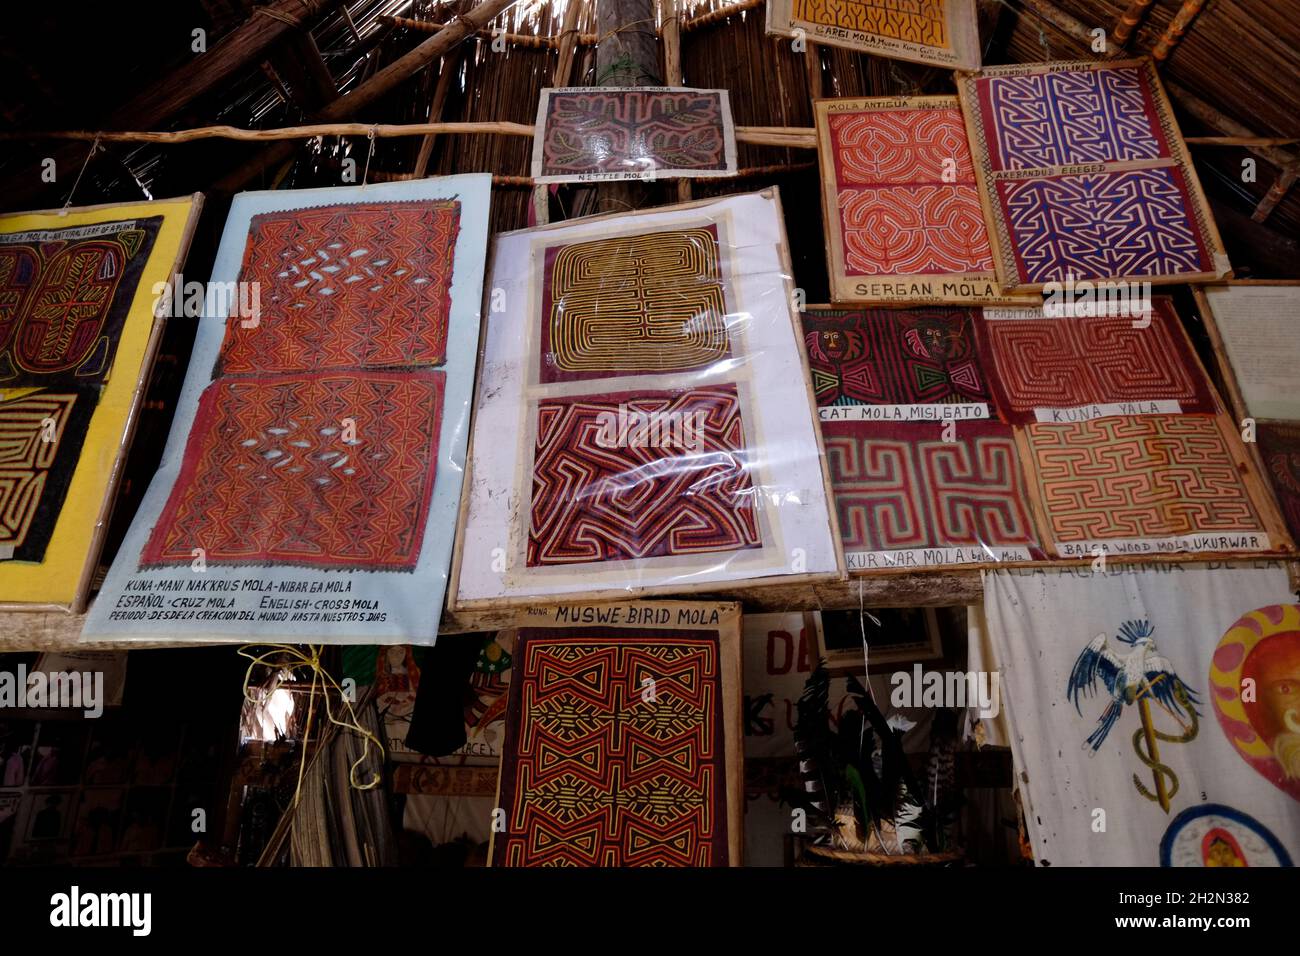 A selection of different design patterns of traditional elaborate embroidered hand stitched Molas worn by local women displayed in a small museum of culture focusing on local traditions in Carti Sugtupu island village administered by Guna natives known as Kuna in the 'Comarca' (region) of the Guna Yala located in the archipelago of San Blas Blas islands in the Northeast of Panama facing the Caribbean Sea. Stock Photo